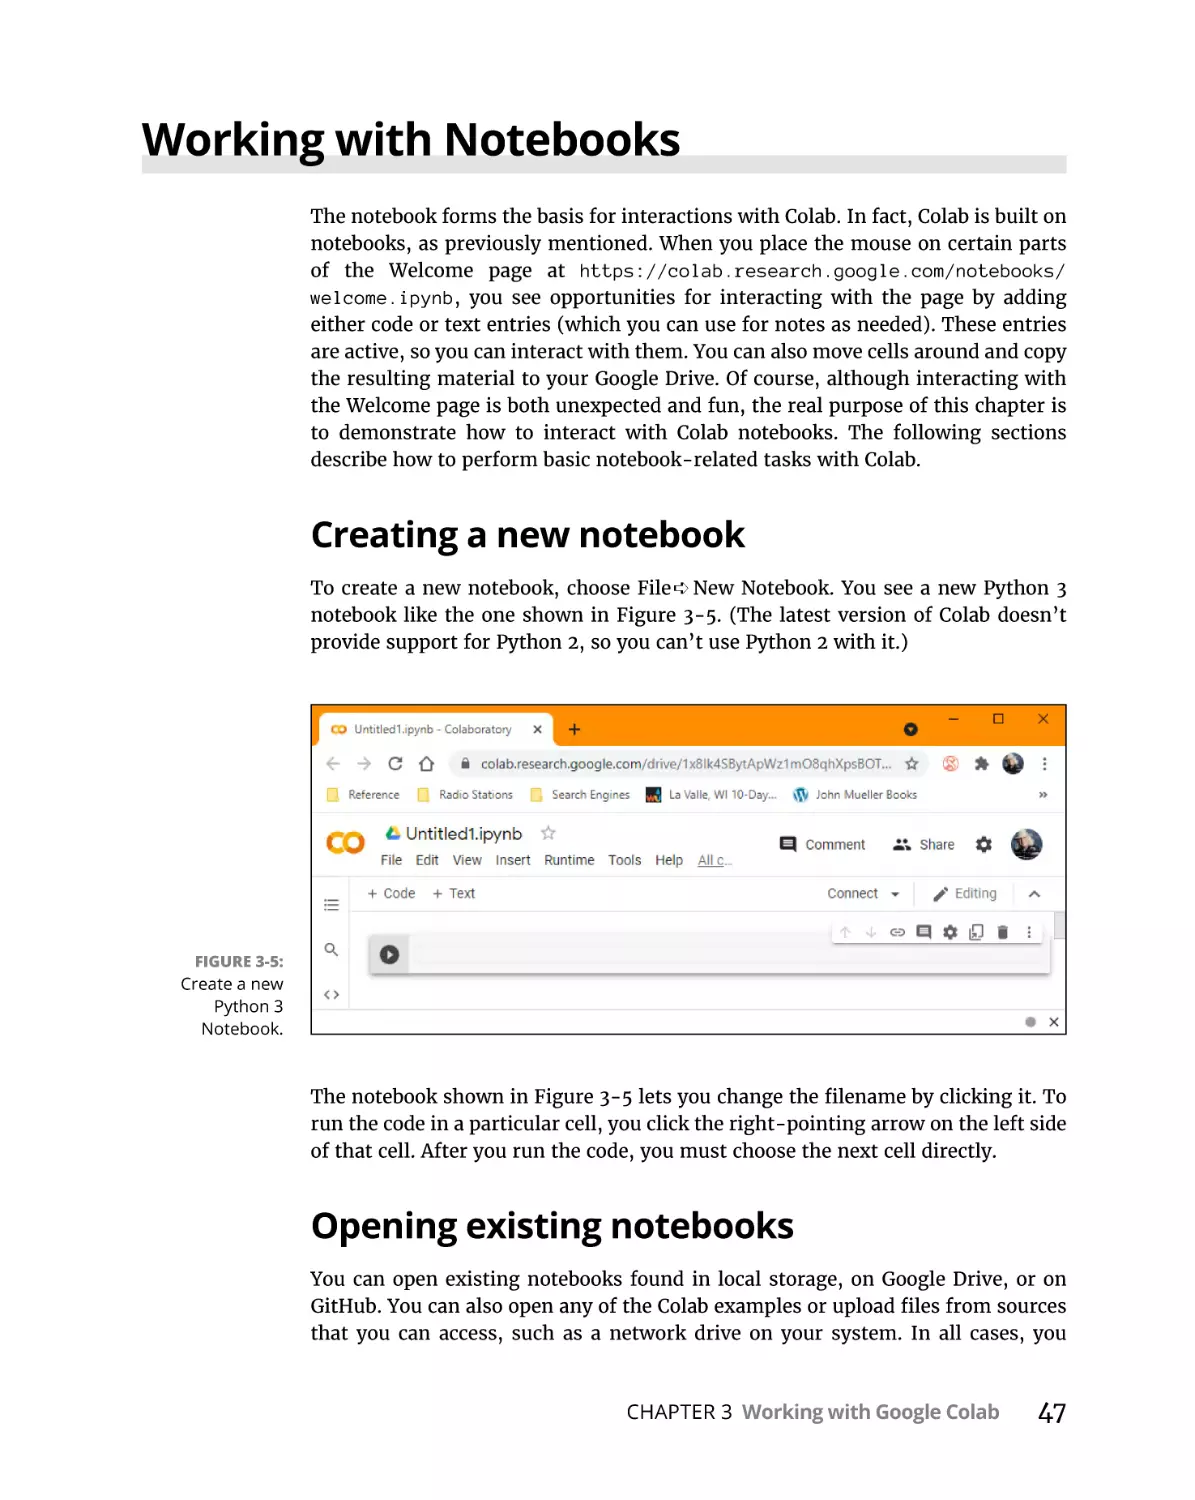 Working with Notebooks
Creating a new notebook
Opening existing notebooks